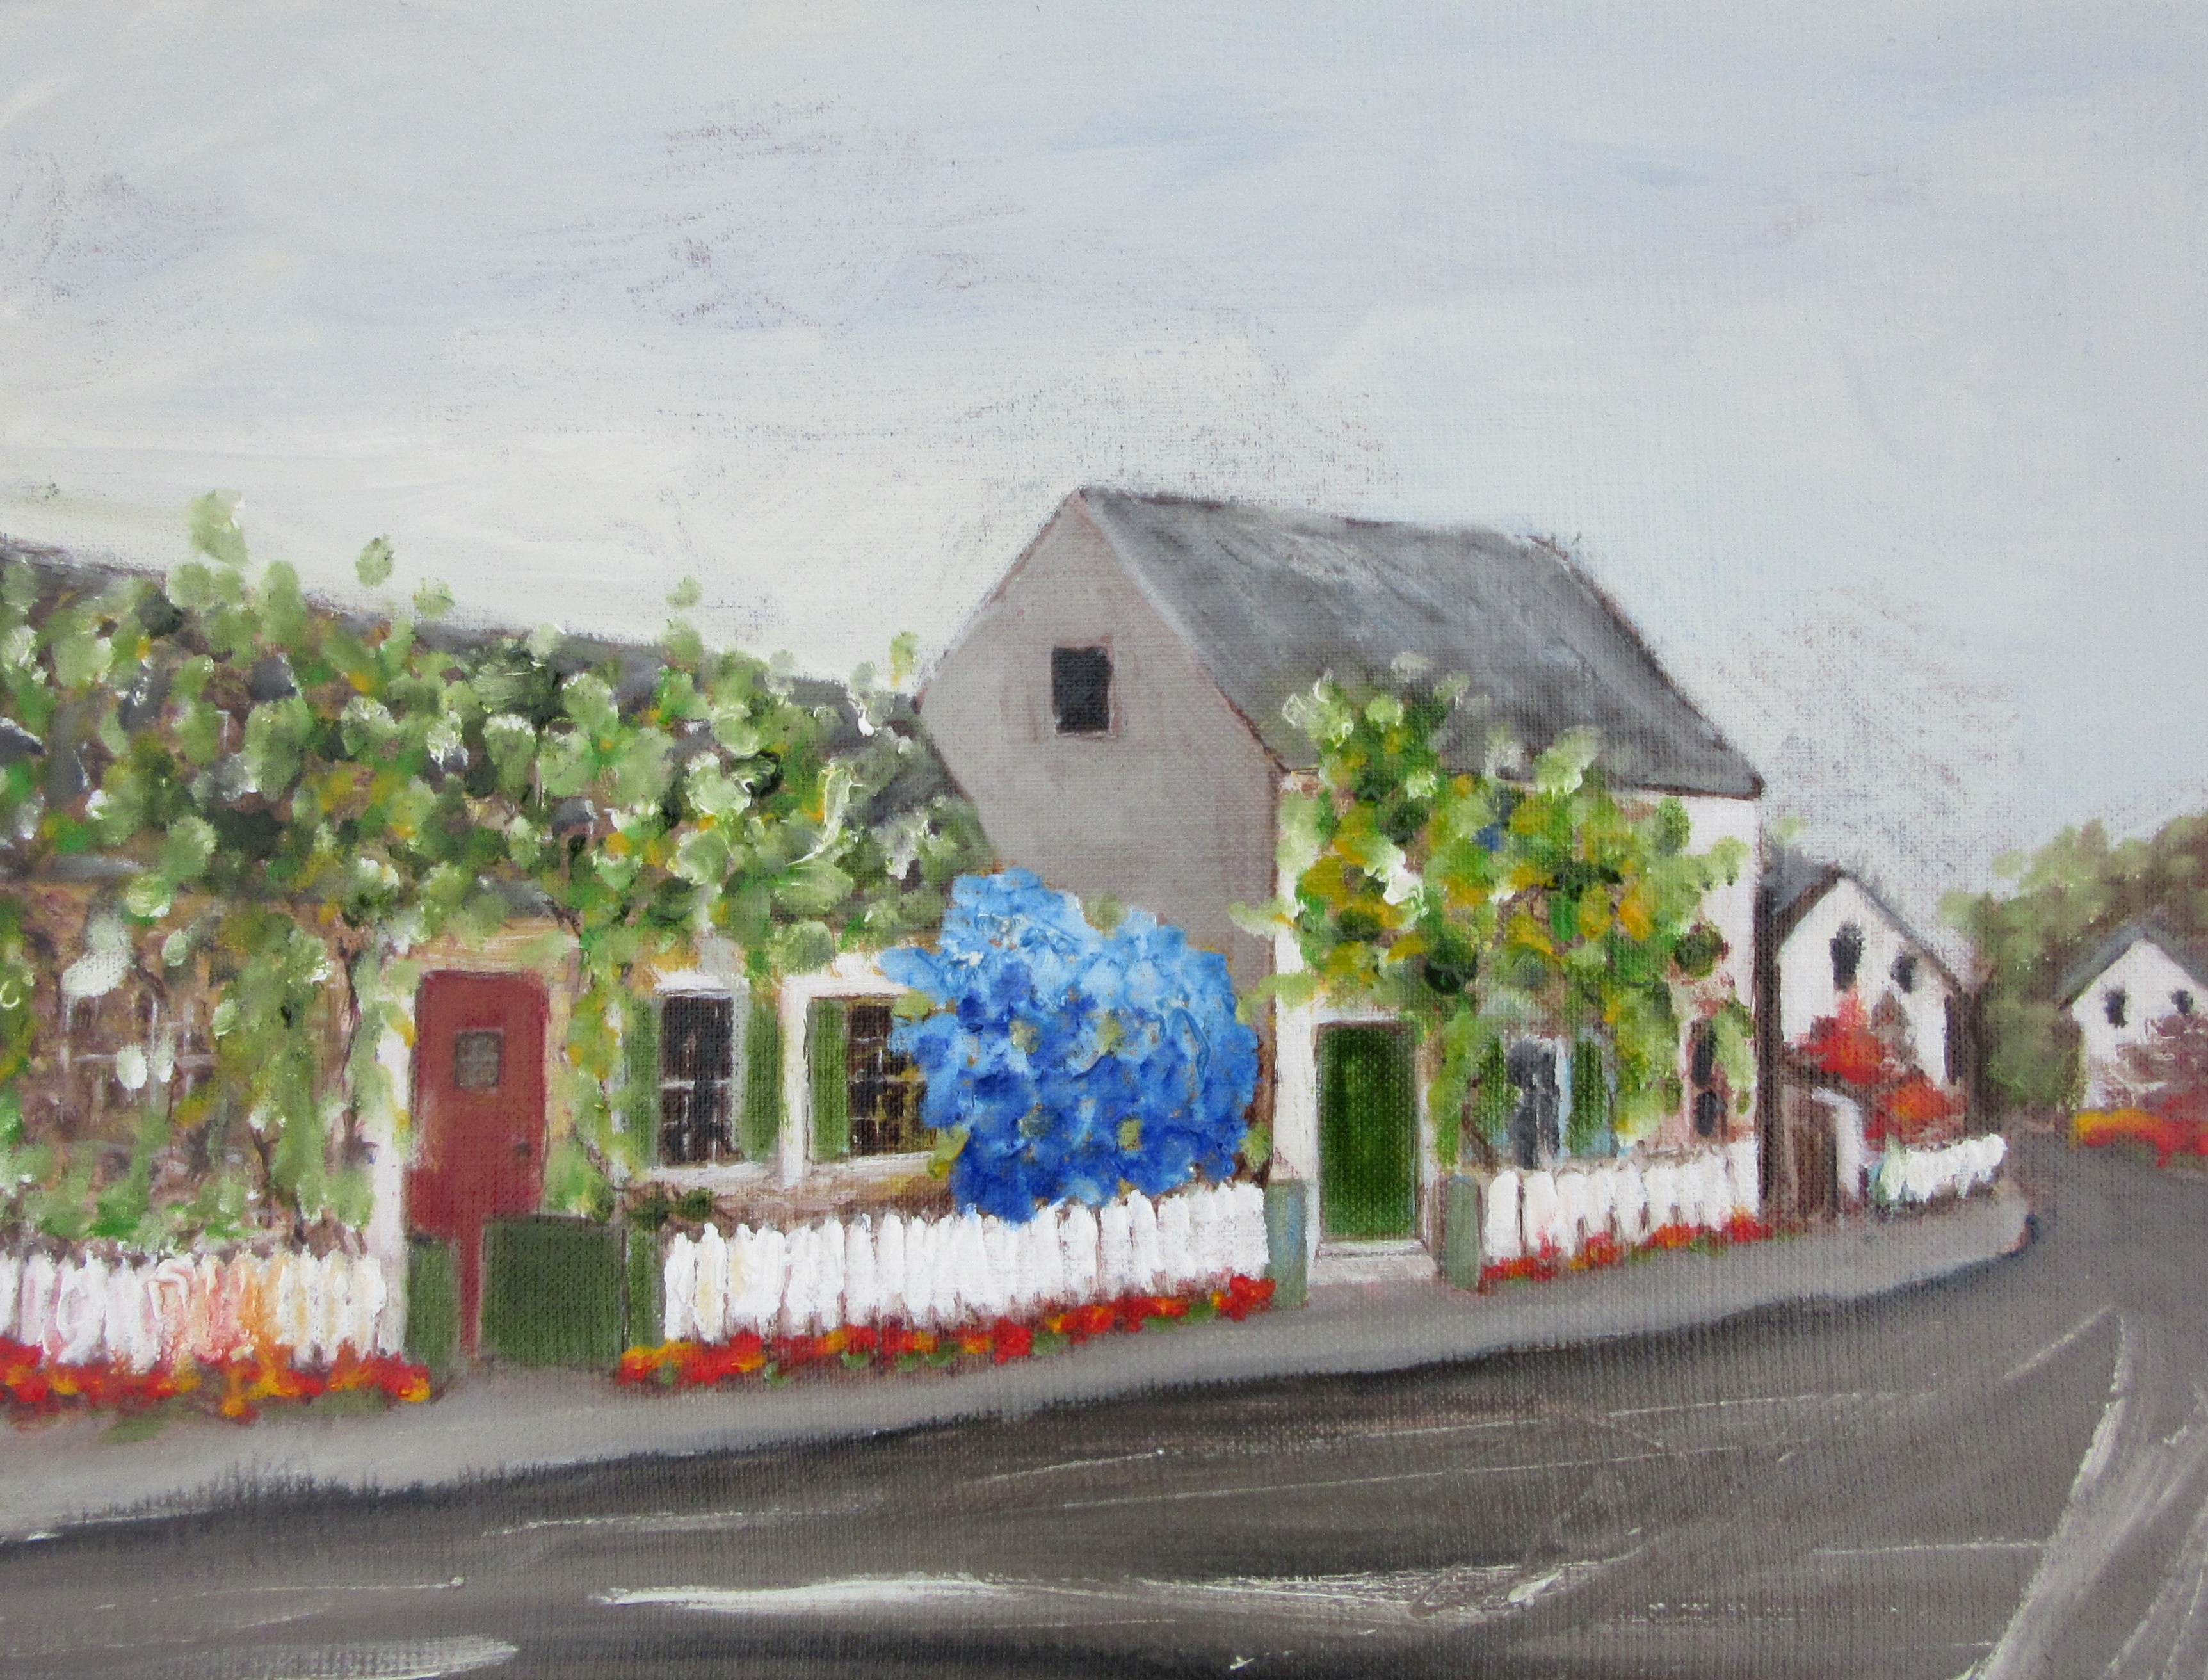 "Nantucket Street"
12in x 16in
Oil on Canvas
by listed artist k. doyle